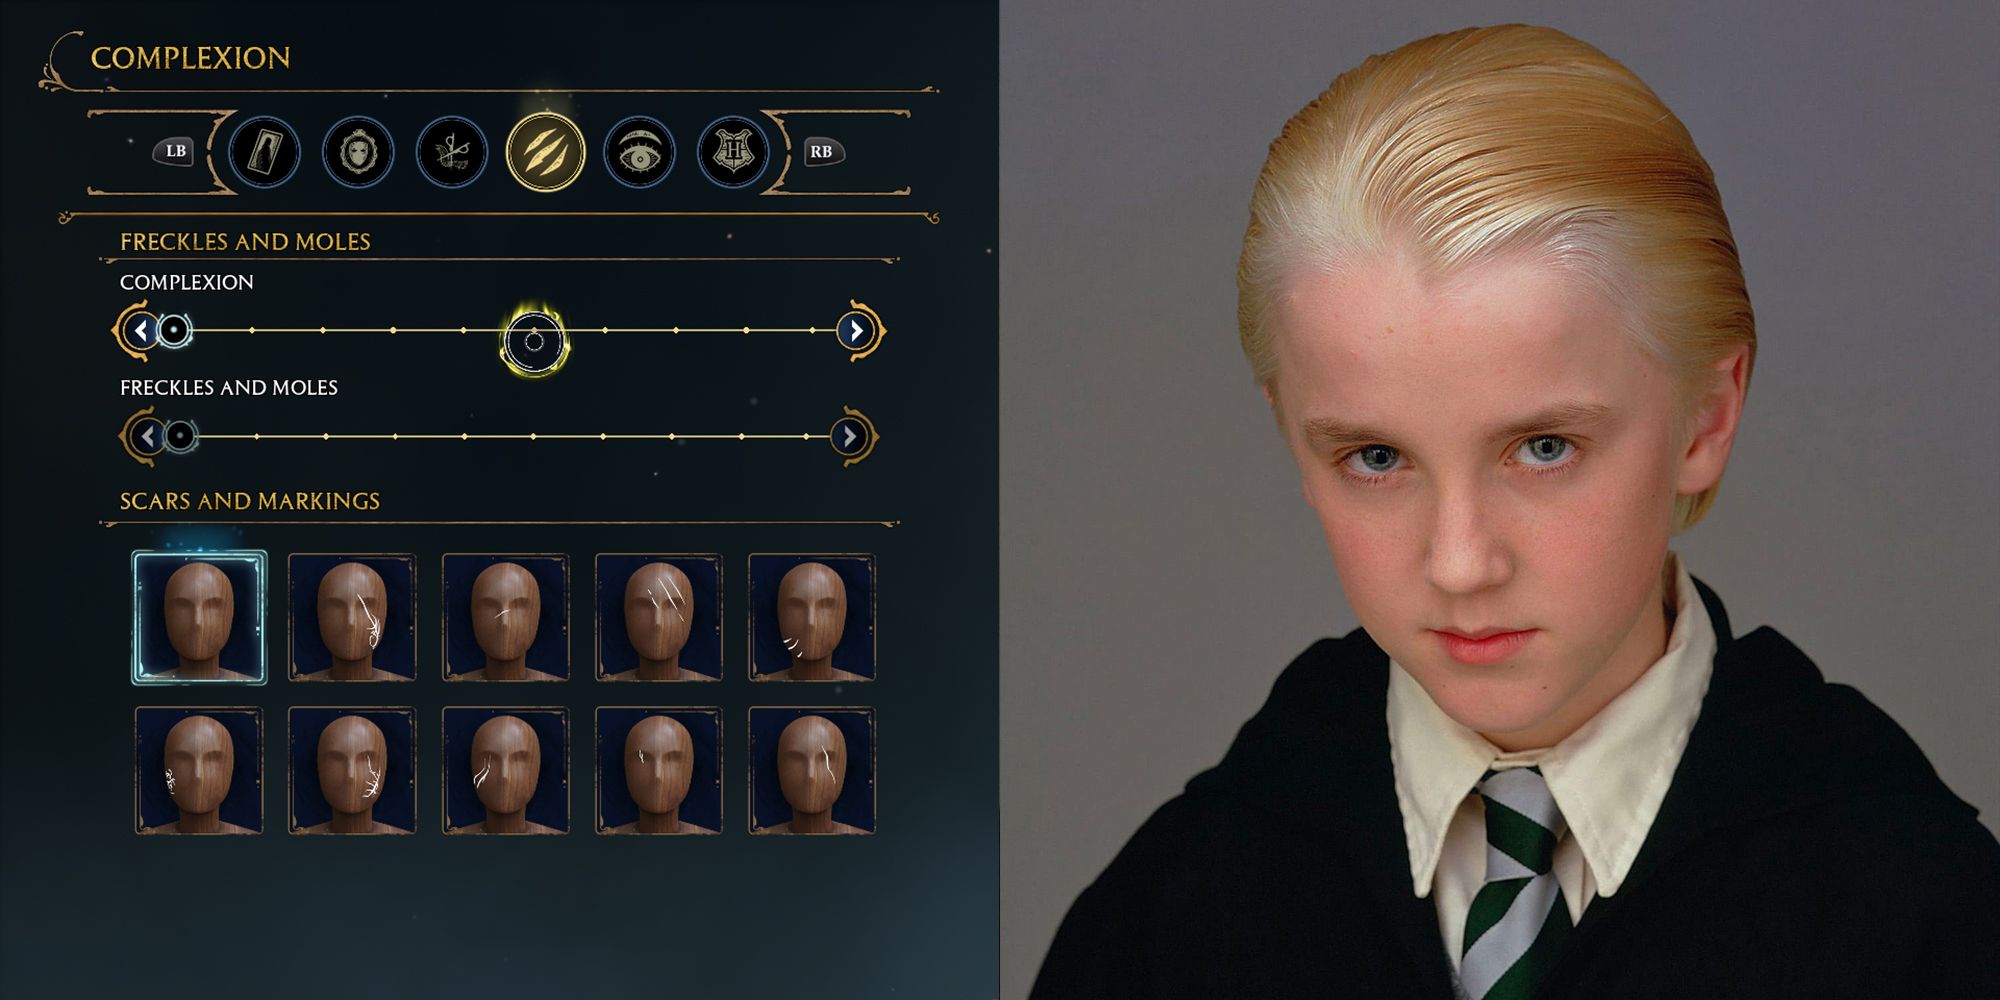 How to build Ronald Weasley in Hogwarts Legacy character creator